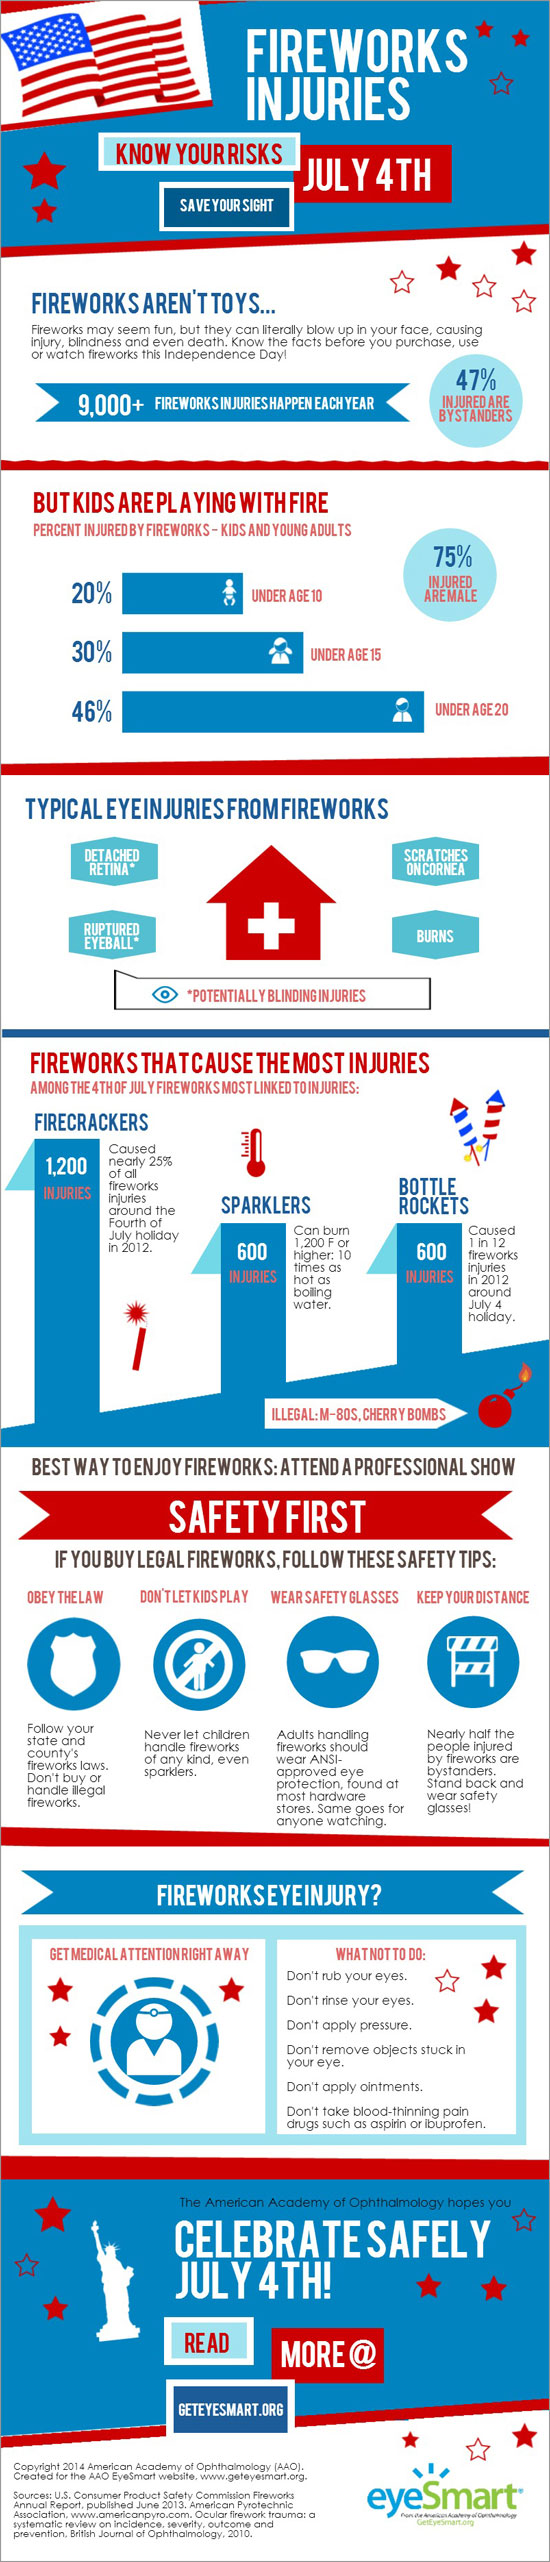 Infographic that shows the risks of fireworks and how to protect your eyes